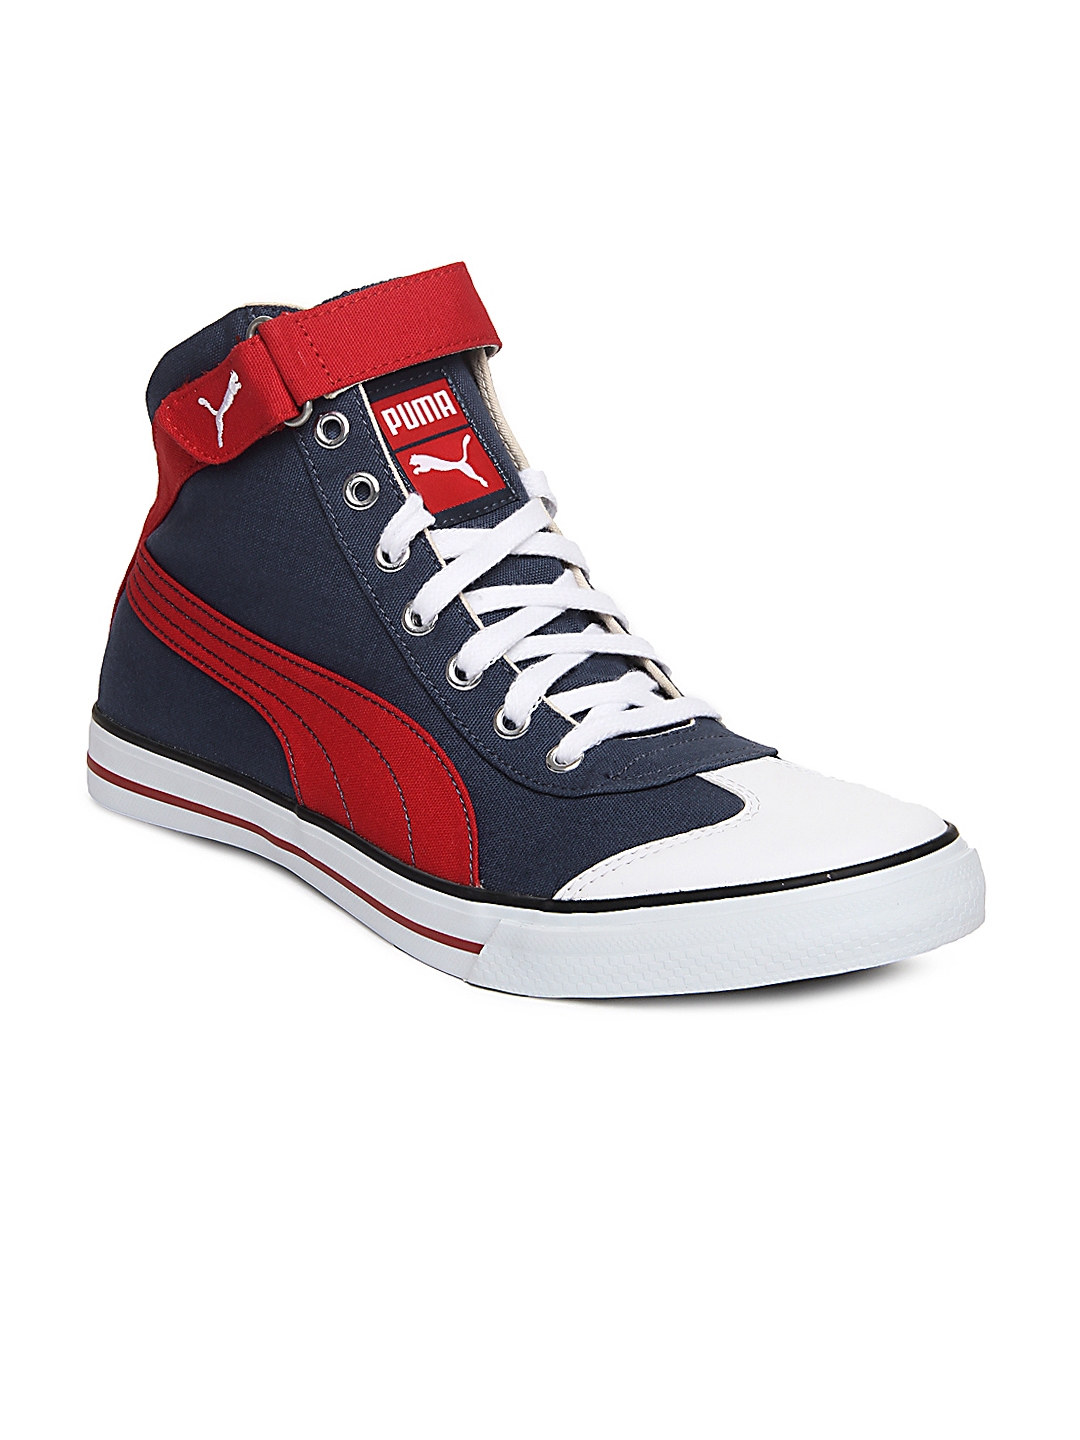 puma 917 mid 2.0 ind sneakers lowest price